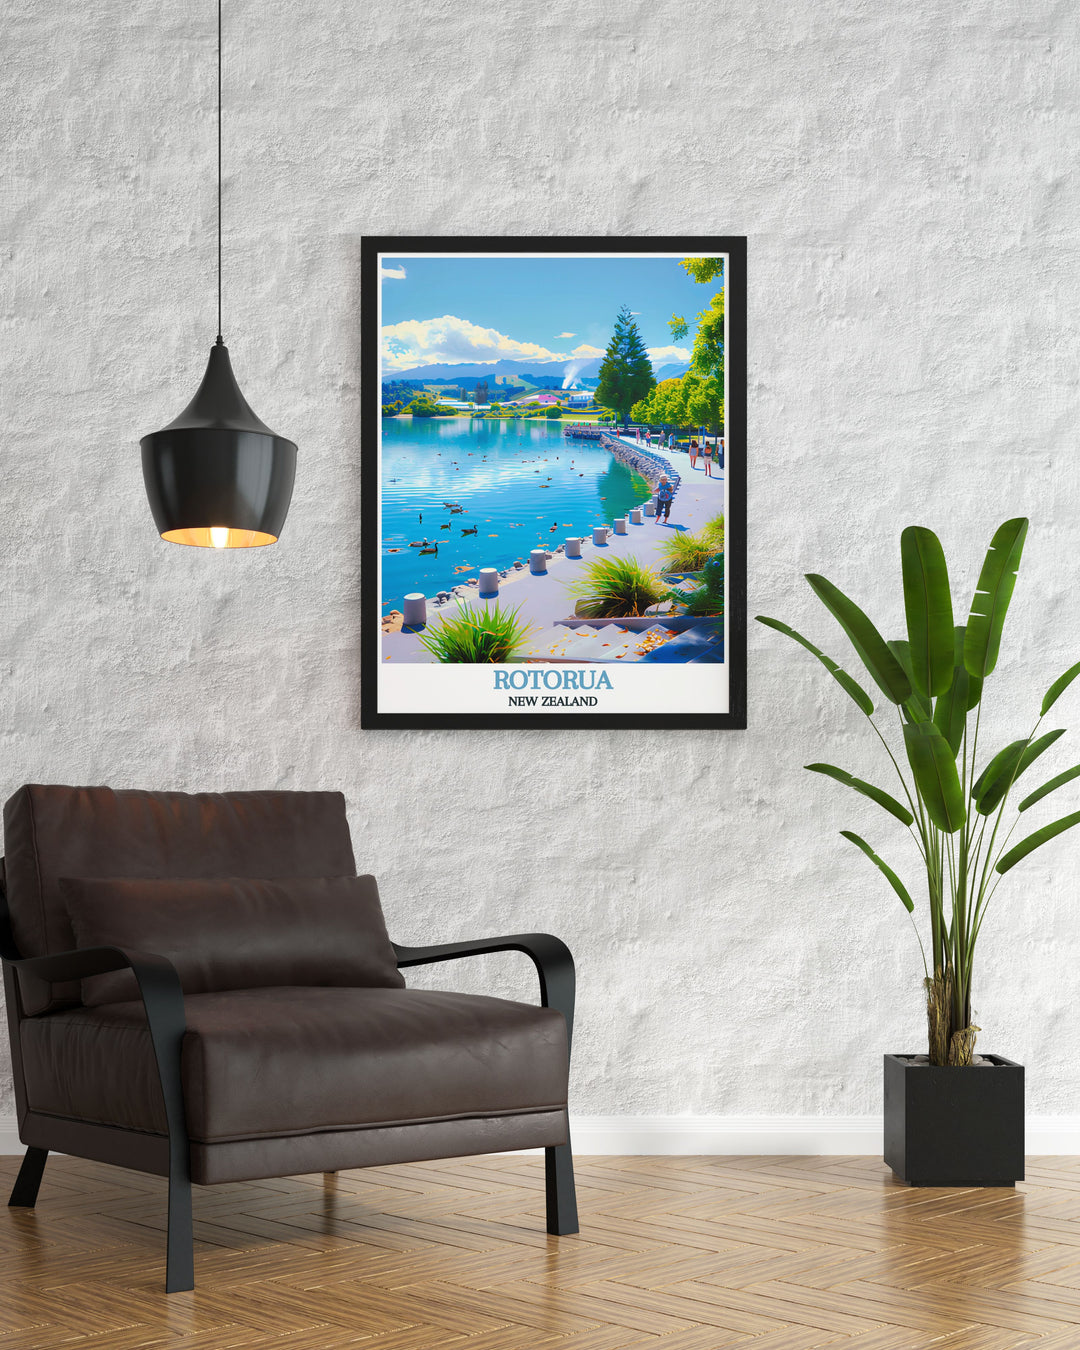 Lake Rotorua poster featuring a detailed and vibrant depiction of Rotorua New Zealand. A must have for anyone who loves travel and natural landscapes. This poster will bring the beauty of Lake Rotorua into your home or office.